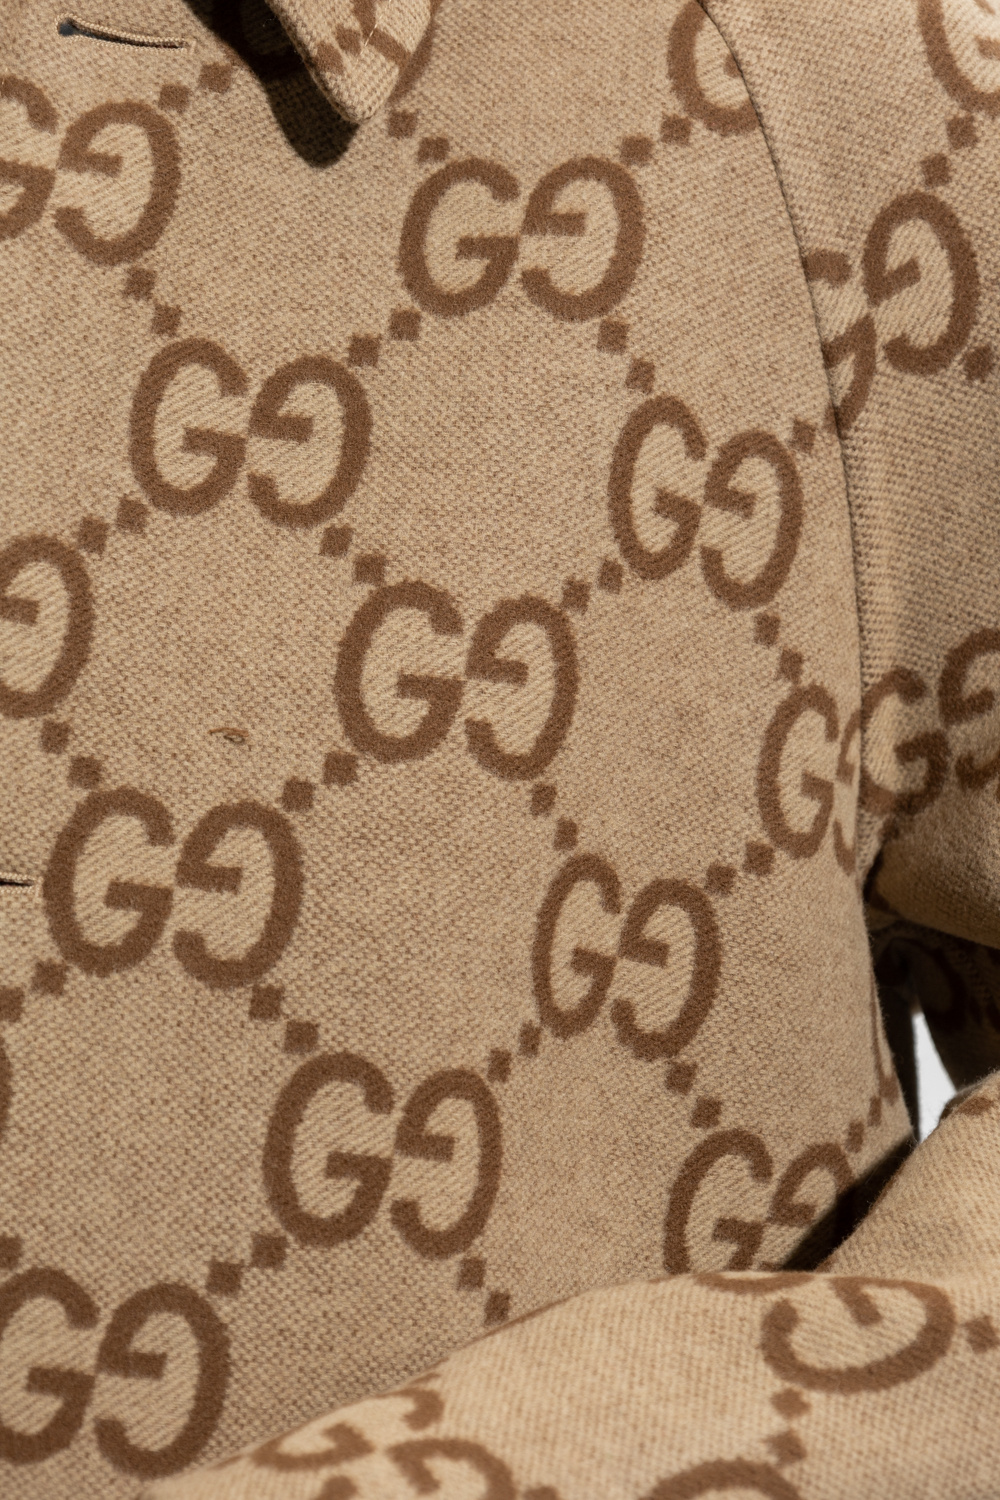 Download The ultimate combination of luxury and streetwear- Supreme Gucci.  Wallpaper